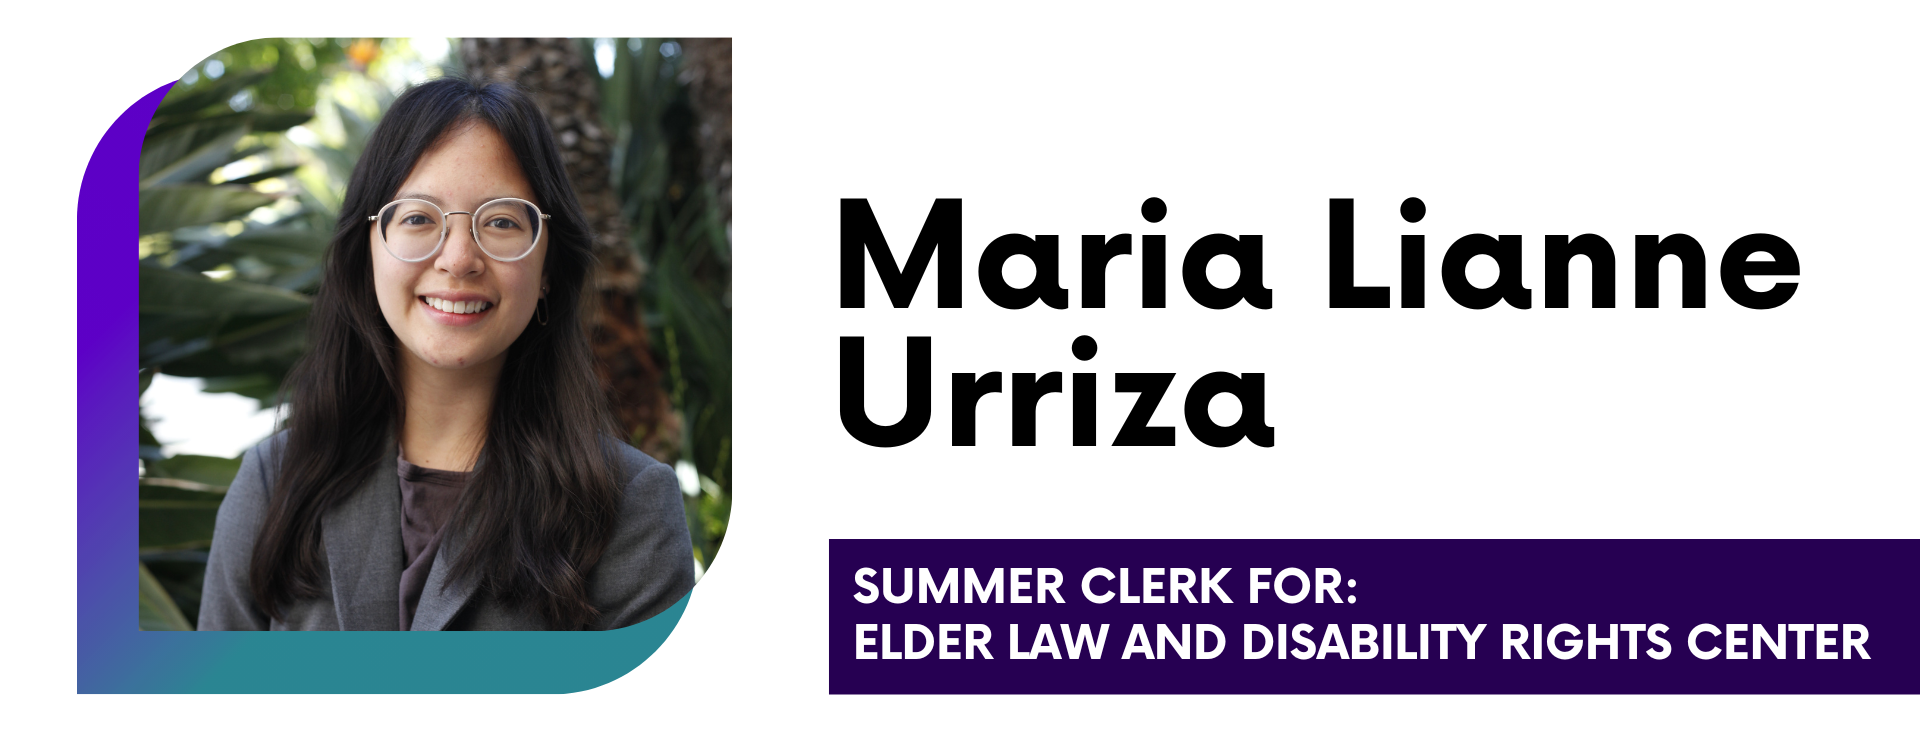 Maria Lianne Urriza Summer Clerk for Elder Law and Disability Rights Center